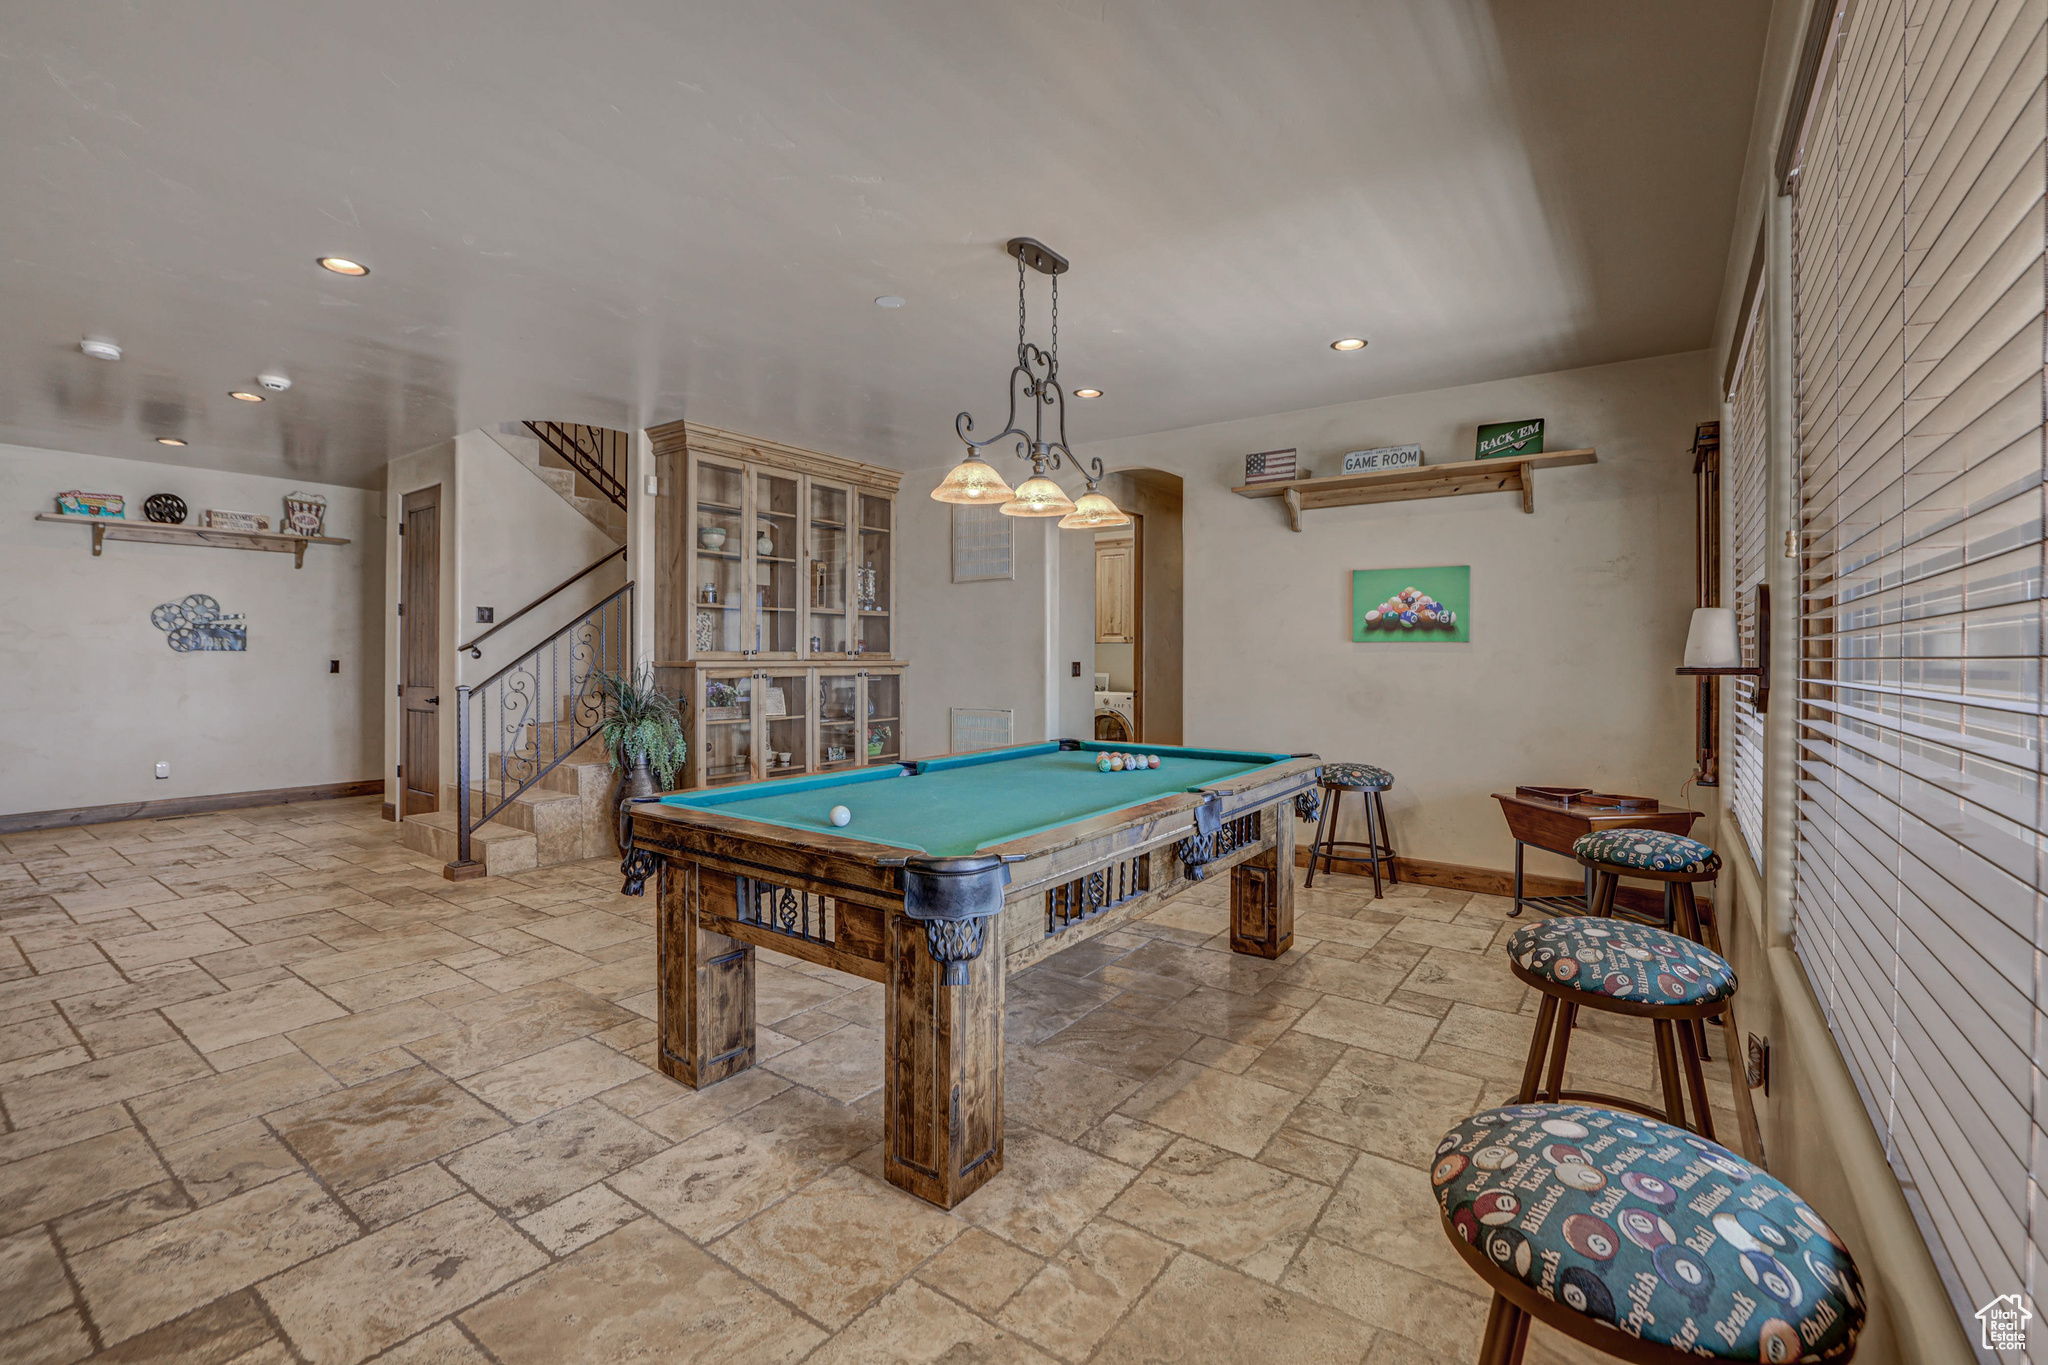 Recreation room with billiards and light tile floors